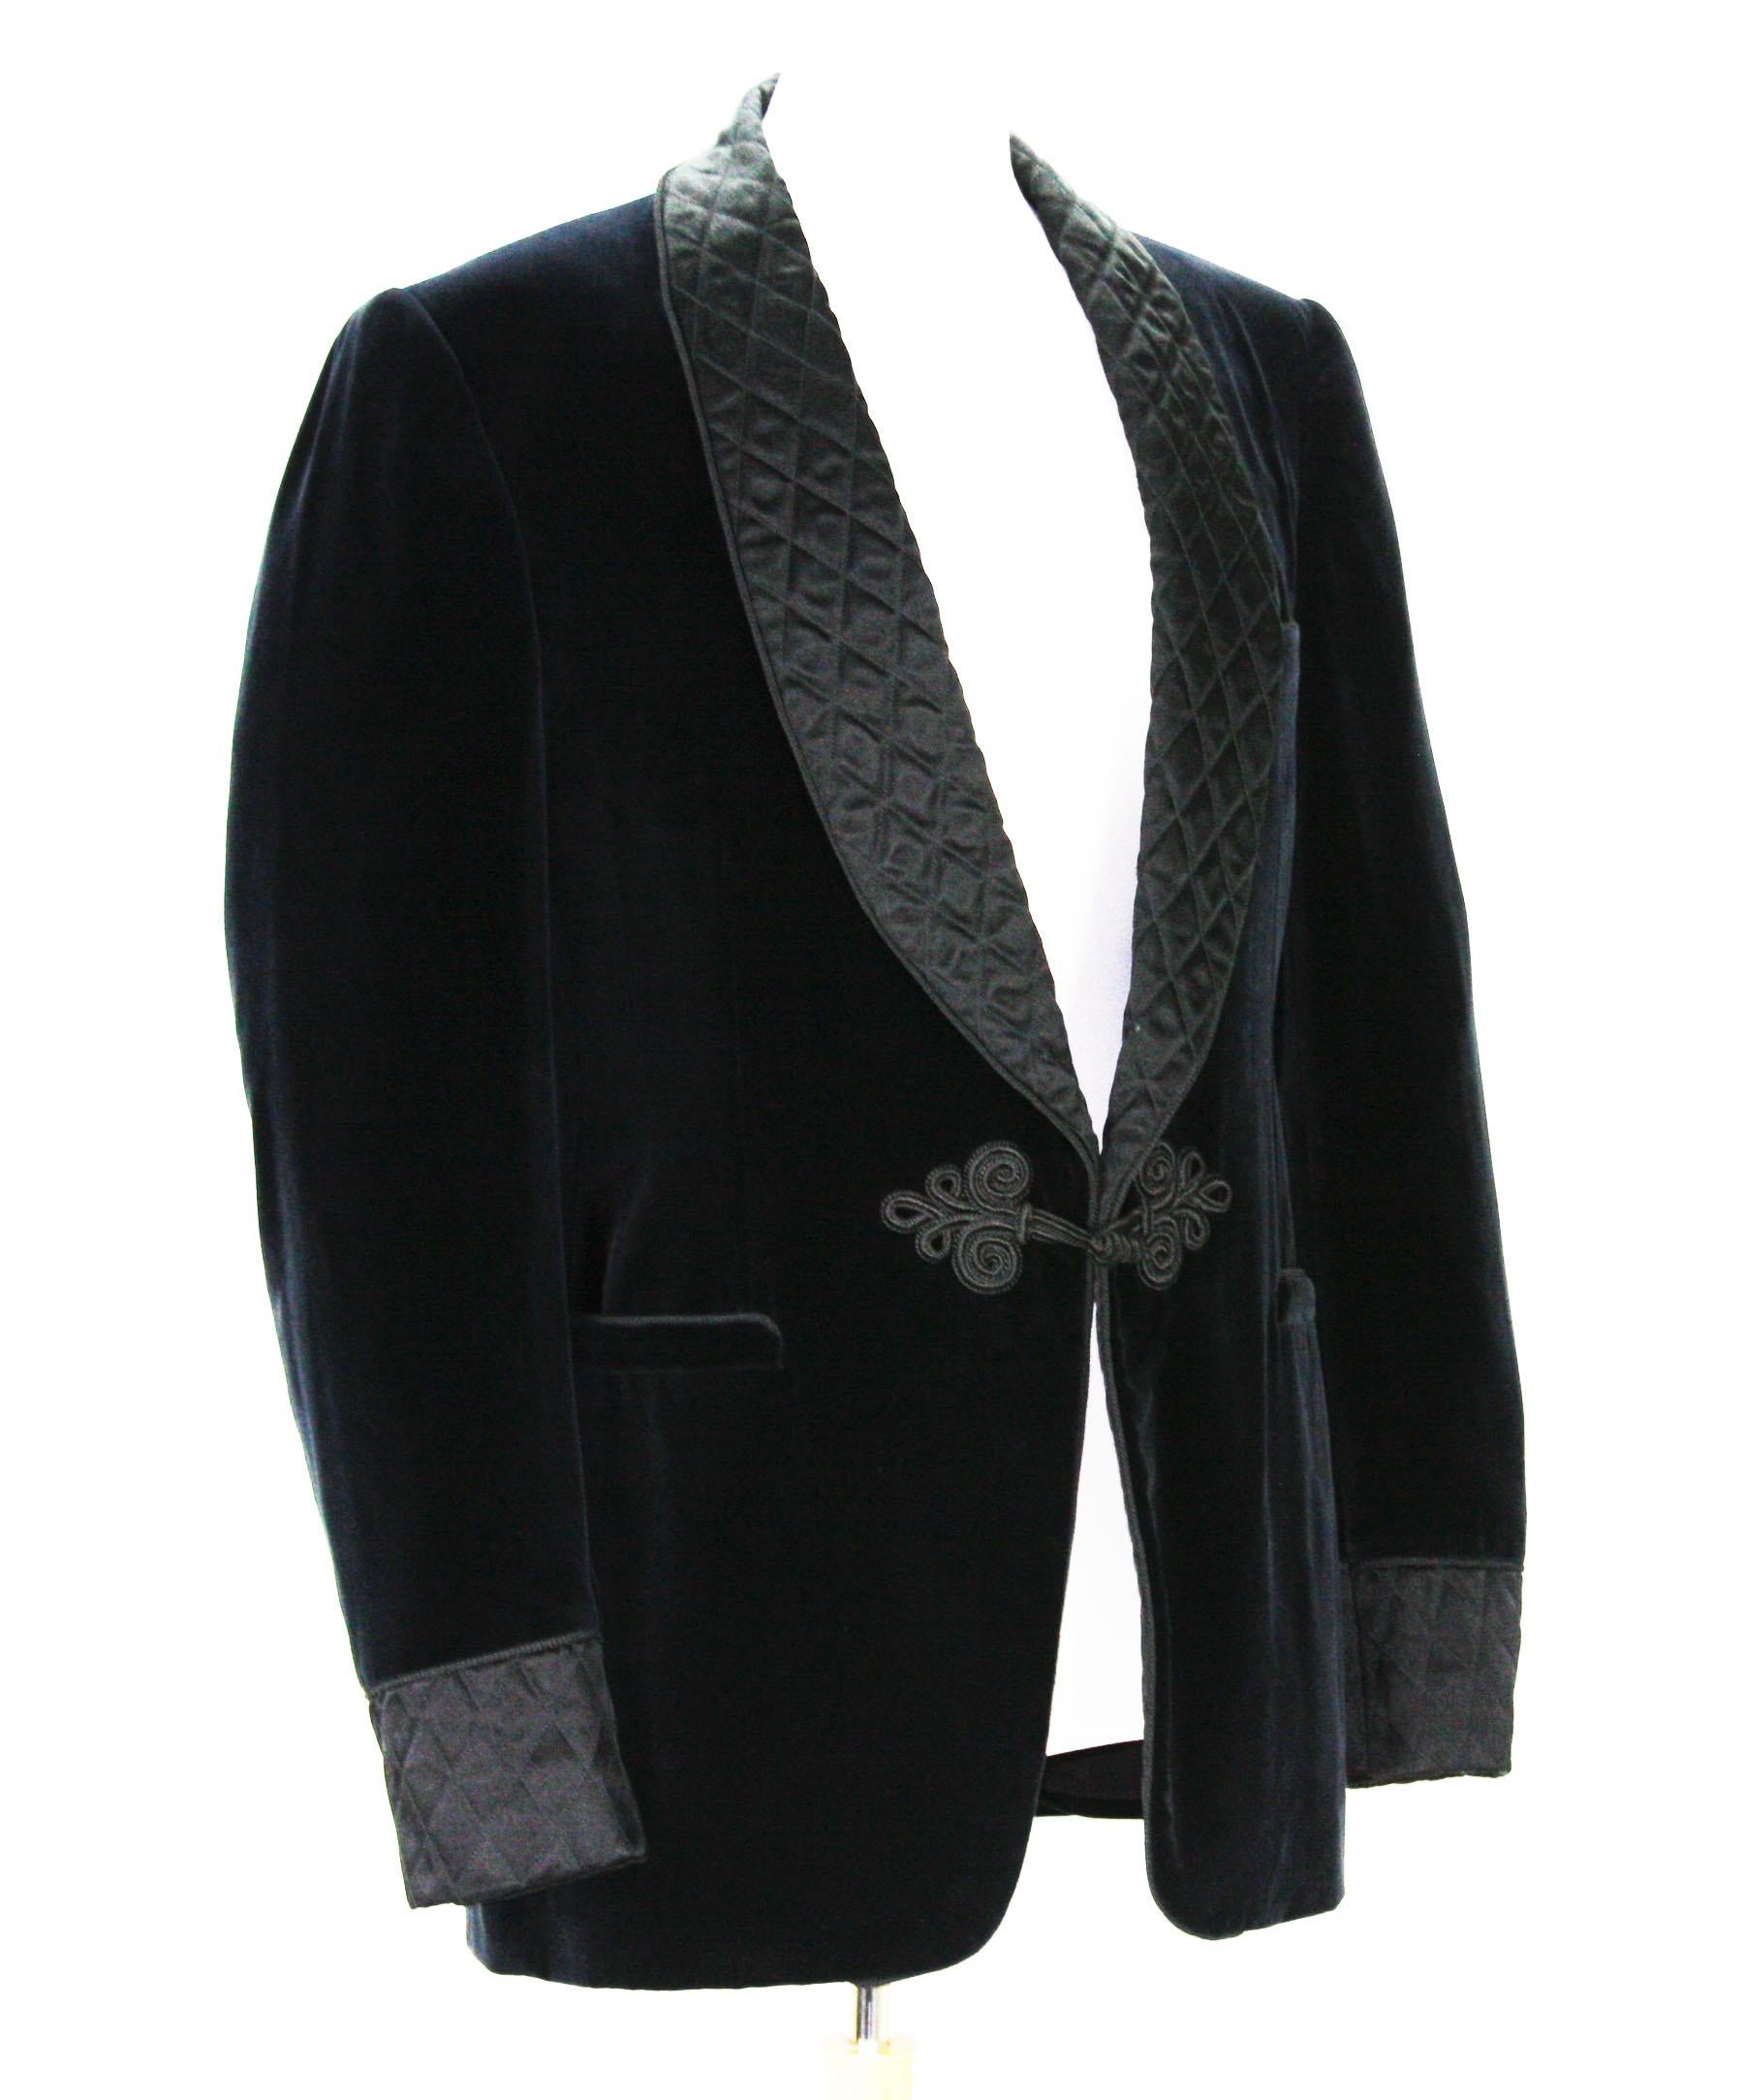 Super Rare and Brand New with Tag!!!
Tom Ford for Gucci Black Velvet Smoking Dinner Jacket
Designer size 56 R - US 46 R
Black Velvet, Quilted Details, Toggle Button Closure with Embroidery, 3 Front Pockets, 4 Inner Pockets, Fully Lined, Double